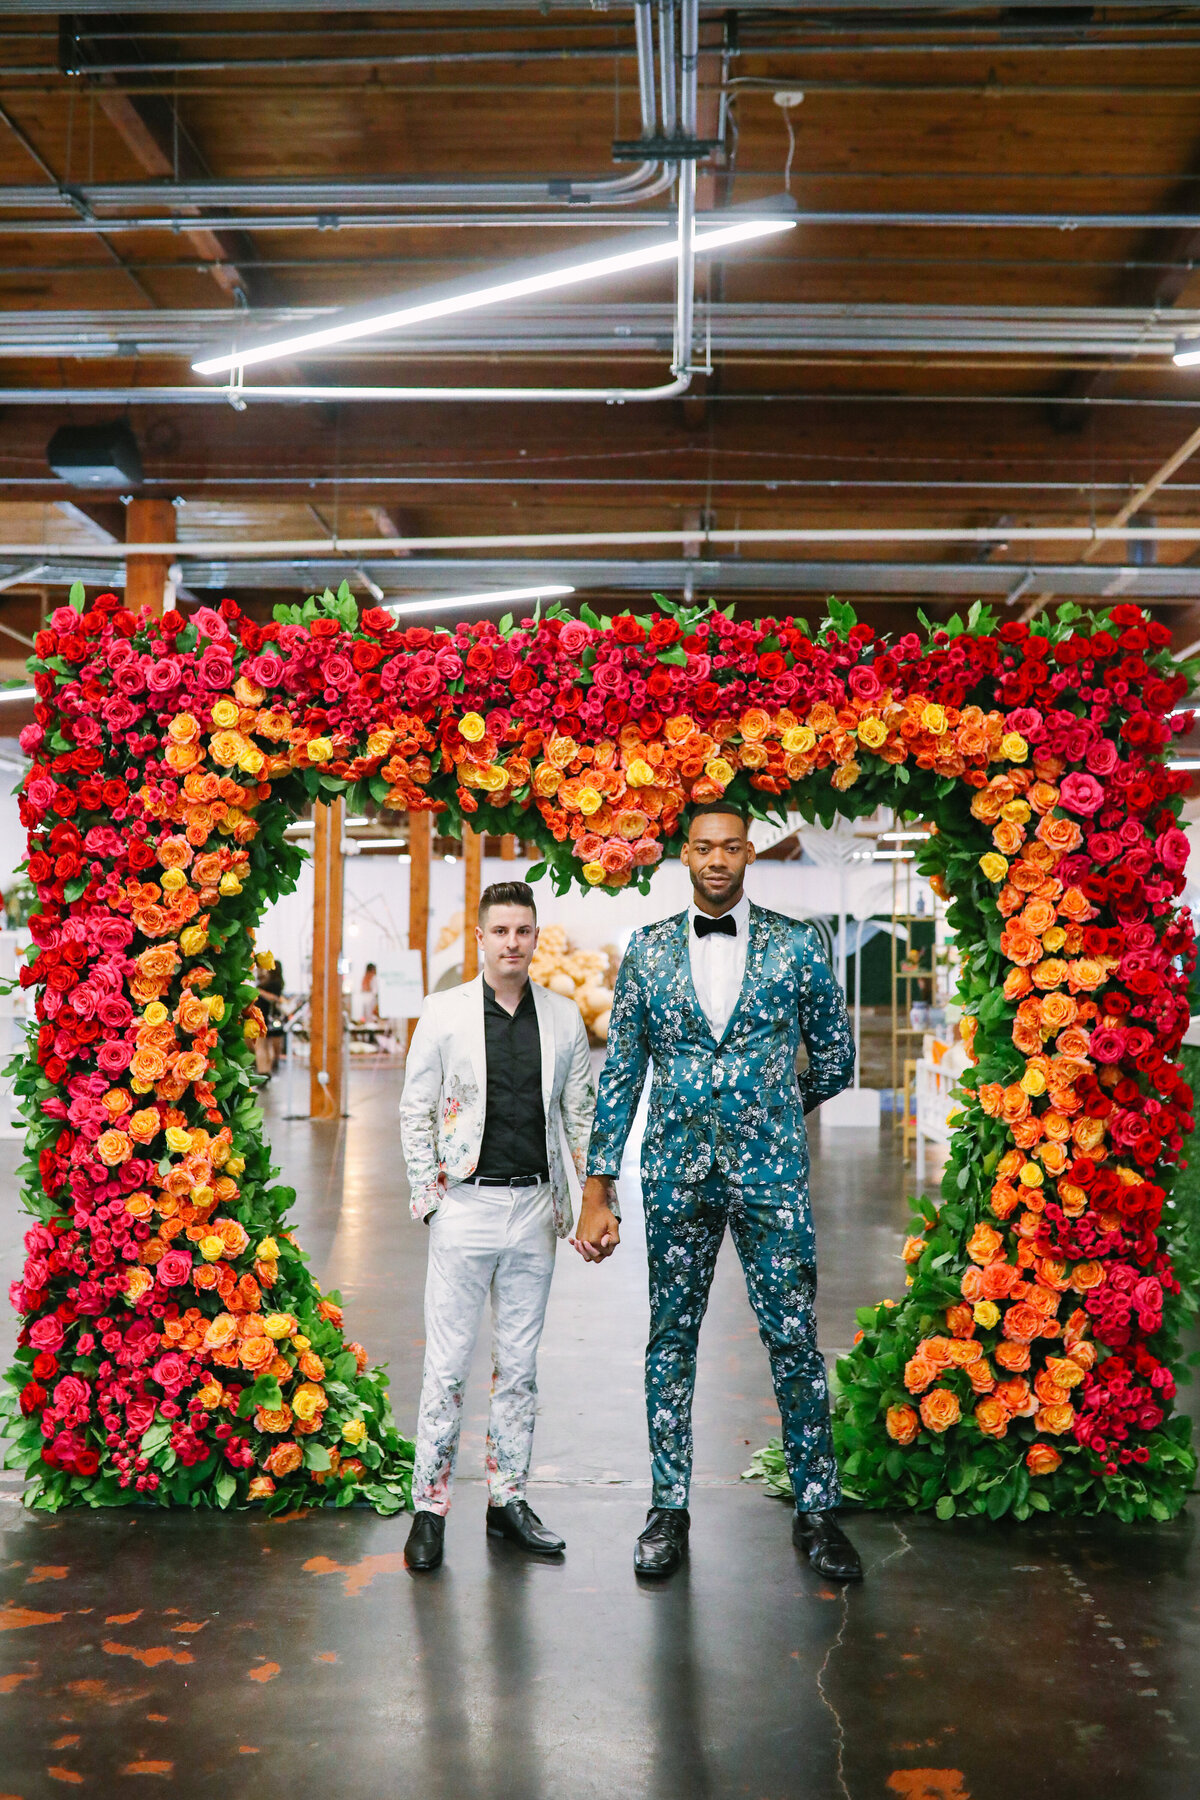 Portrait of two grooms posing in front of a large floral arrangement on their wedding day in Dallas, Texas. The floral arrangement is made up of yellow, orange, and red roses to create a large heart shape around the grooms and is backed by greenery. The groom on the right is wearing an elaborate blue suit covered in floral designs and a bowtie. The groom on the left is wearing a white suit with elaborate floral designs and a black dress shirt.